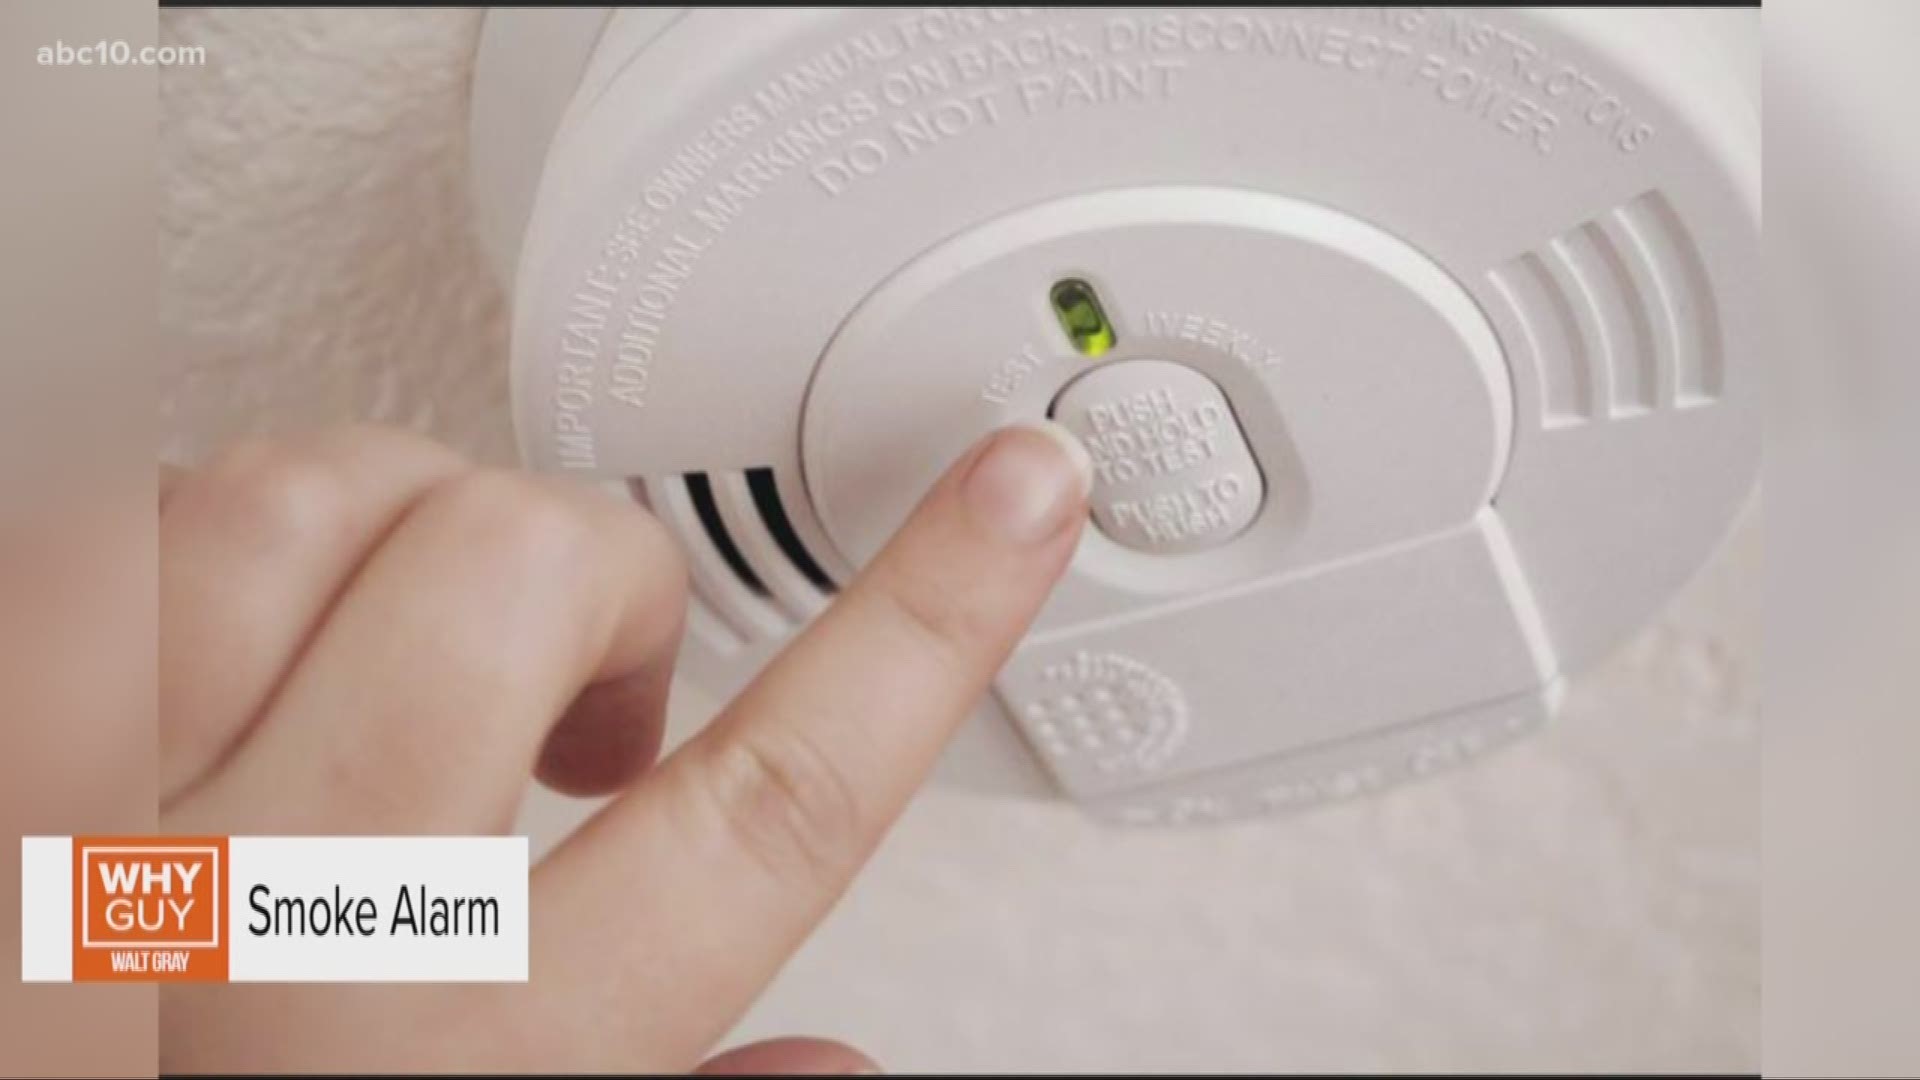 Did you know a drop in room temperature can cause your smoke alarm to chirp? Walt explains why.